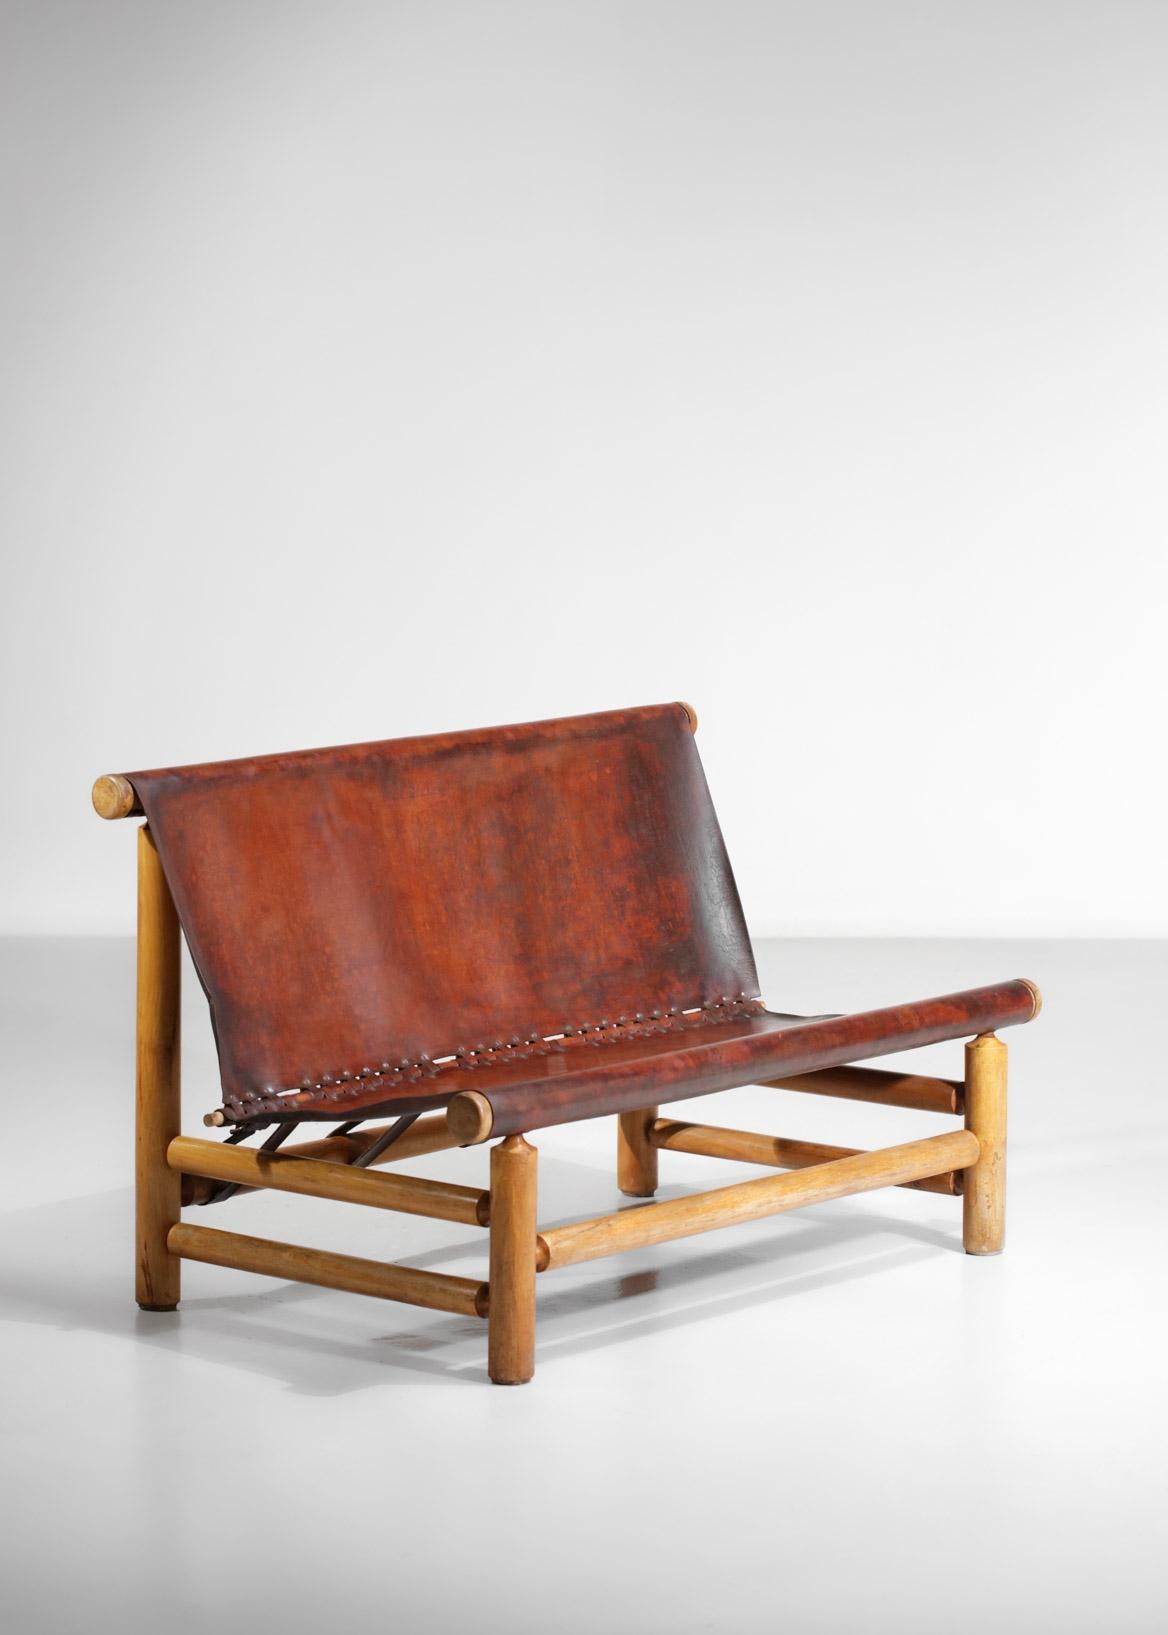 Pine Bench 50s Style Charlotte Perriand or Ilmarii Tapiovaraa Cognac Leather For Sale 8